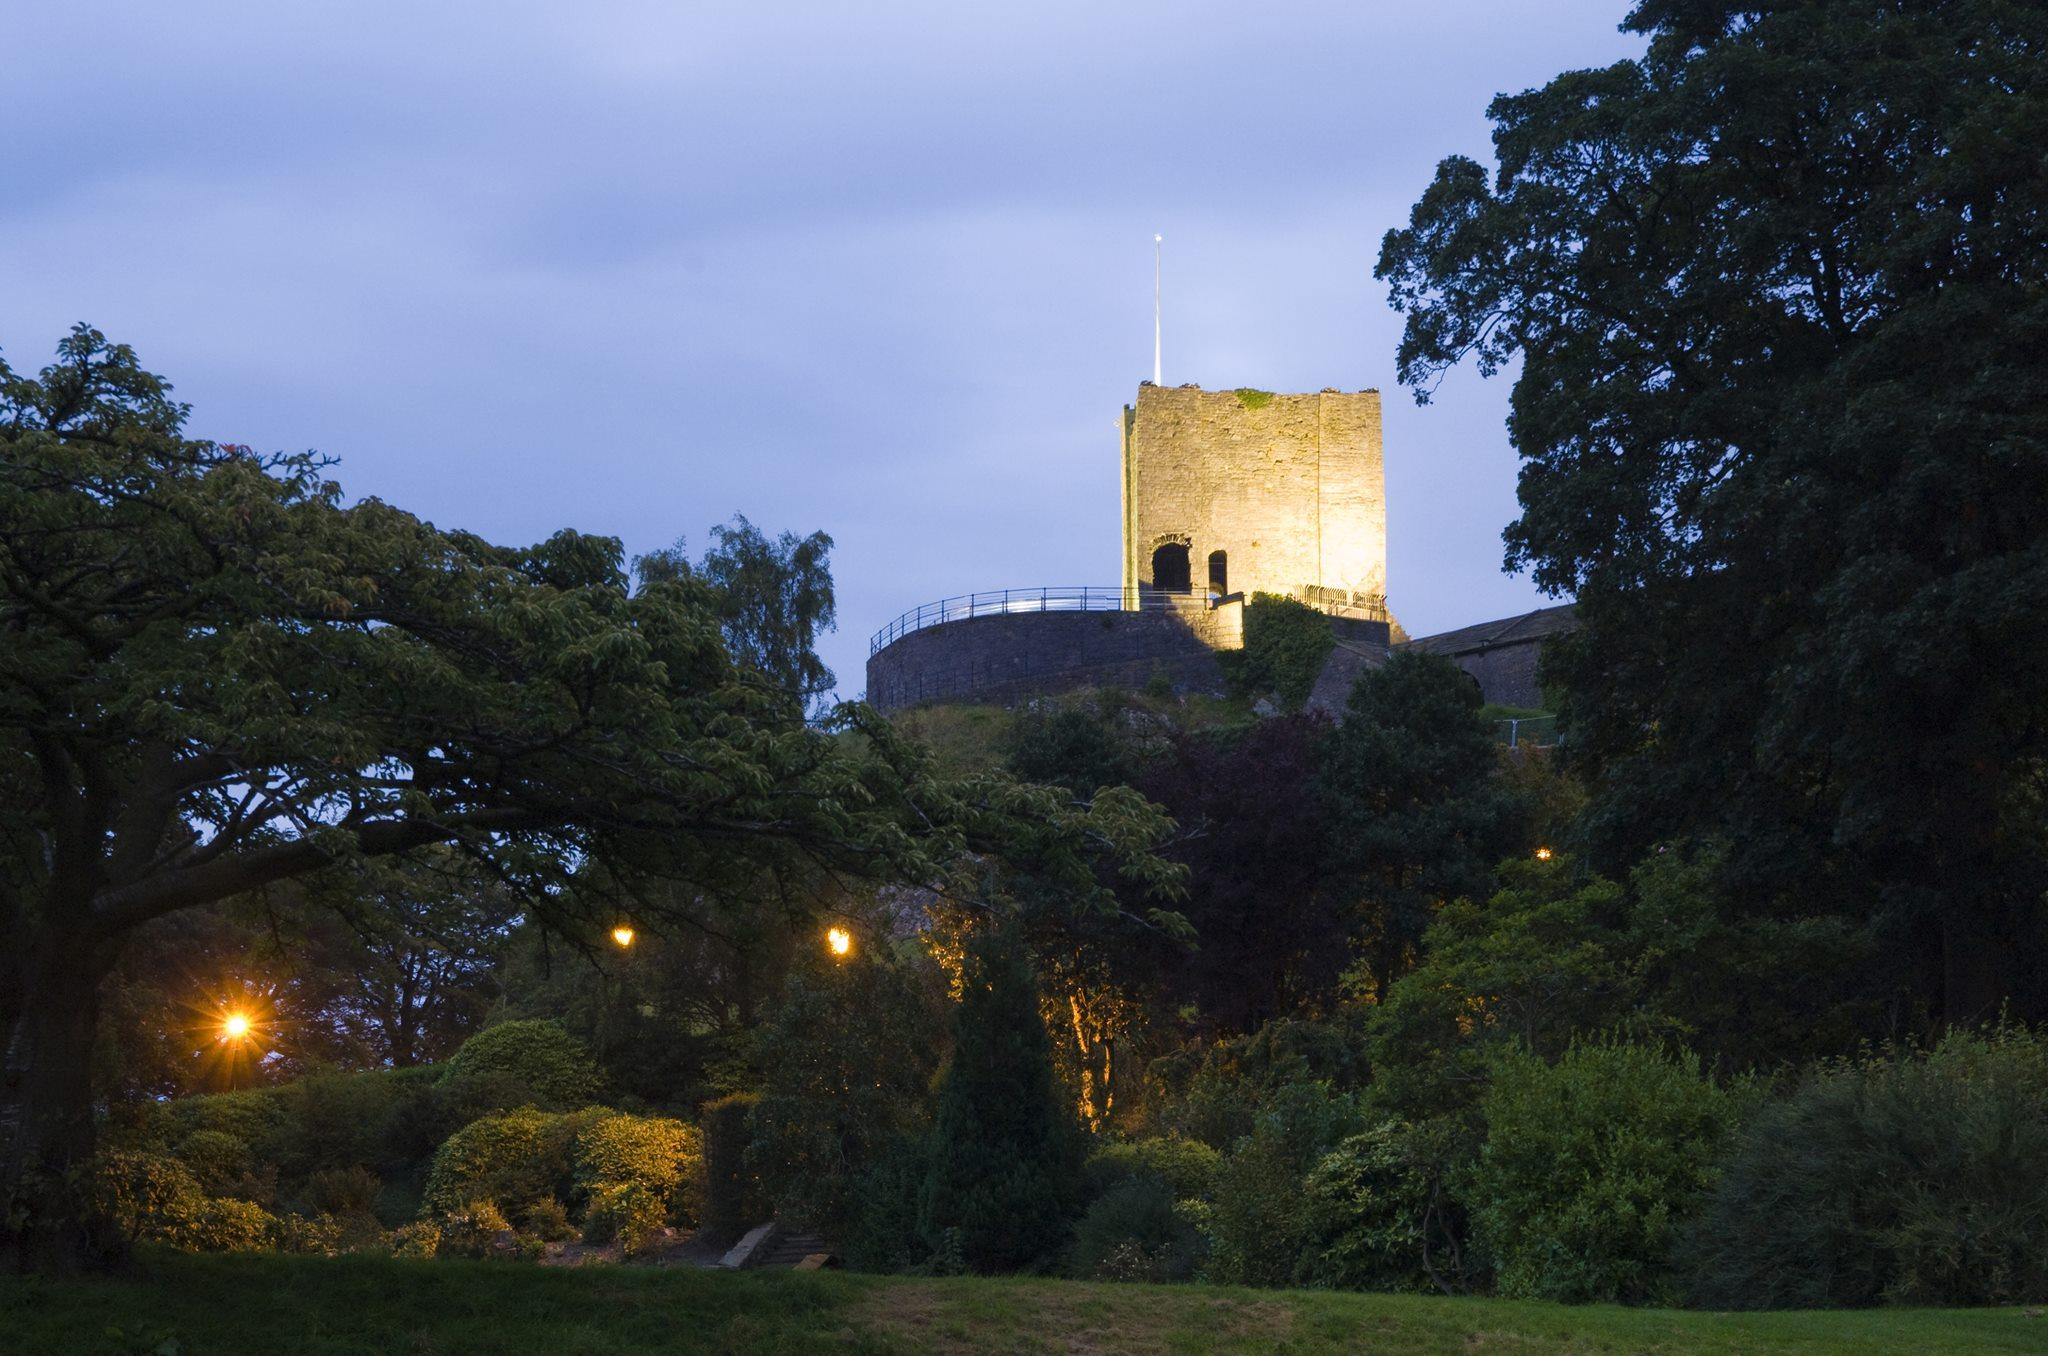 Clitheroe Castle at night